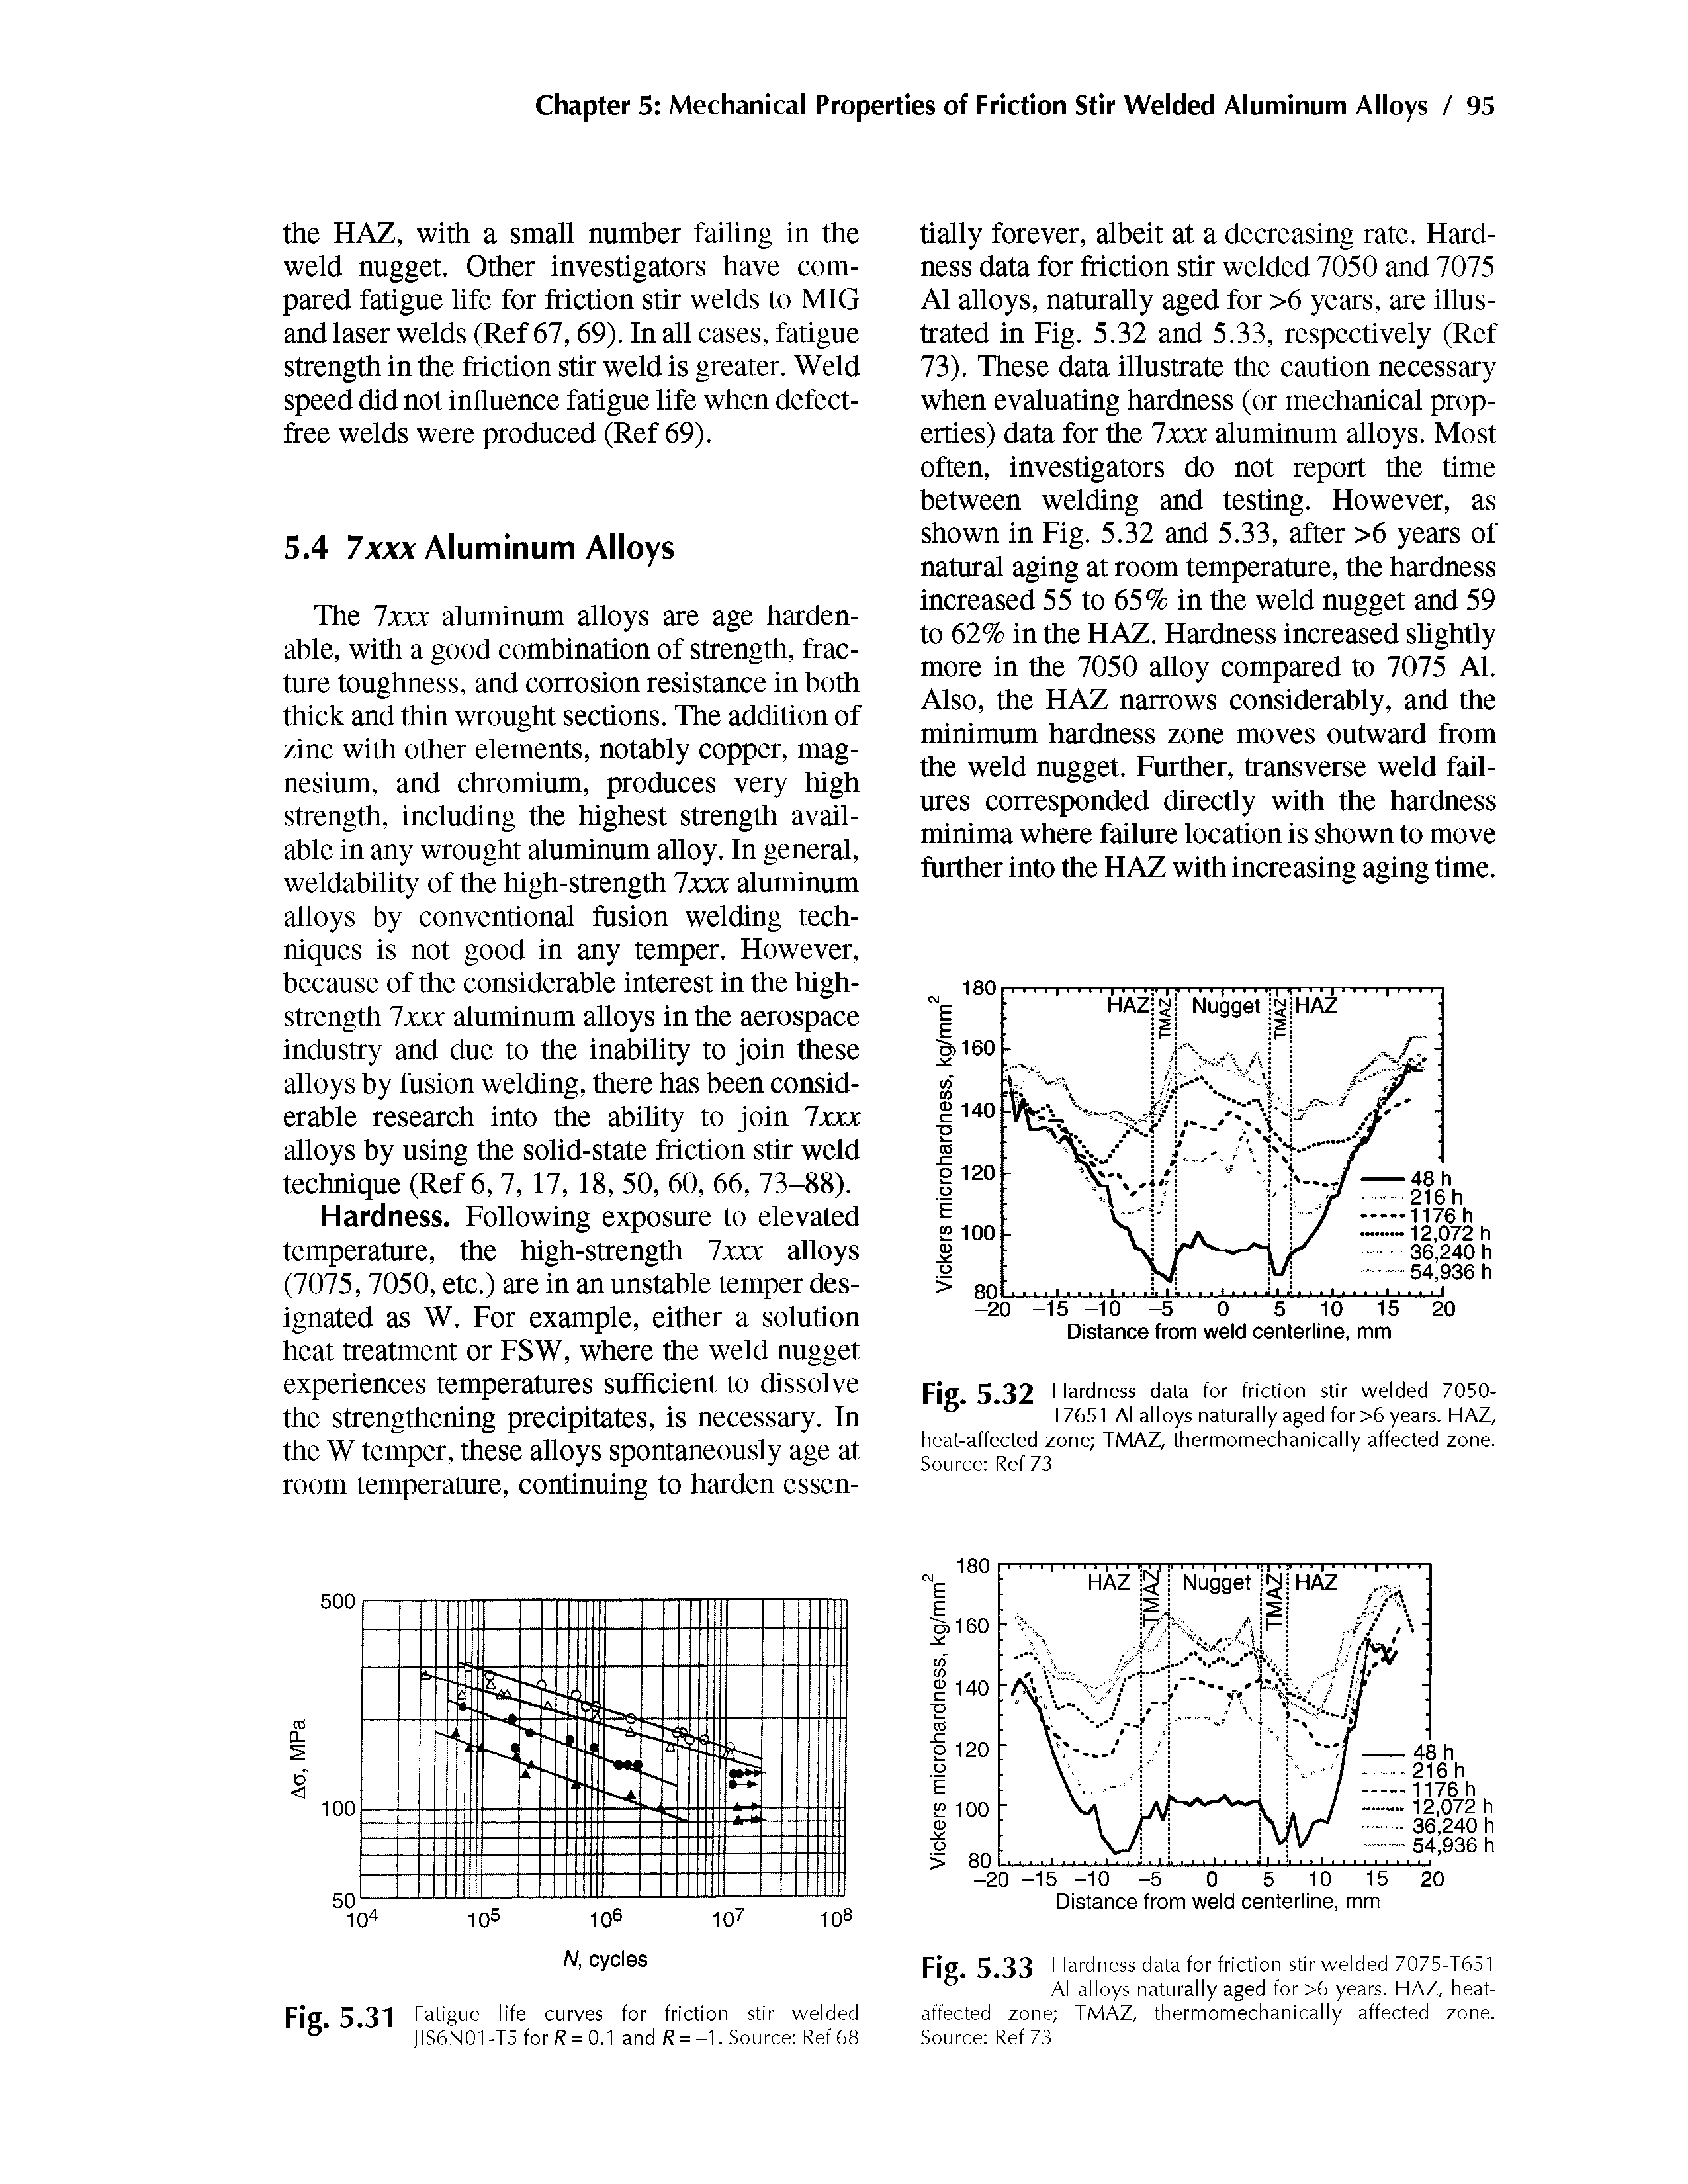 Fig. 5.32 Hardness data for friction stir welded 7050-T7551 Al alloys naturally aged for >6 years. HAZ, heat-affected zone TMAZ, thermomechanically affected zone.